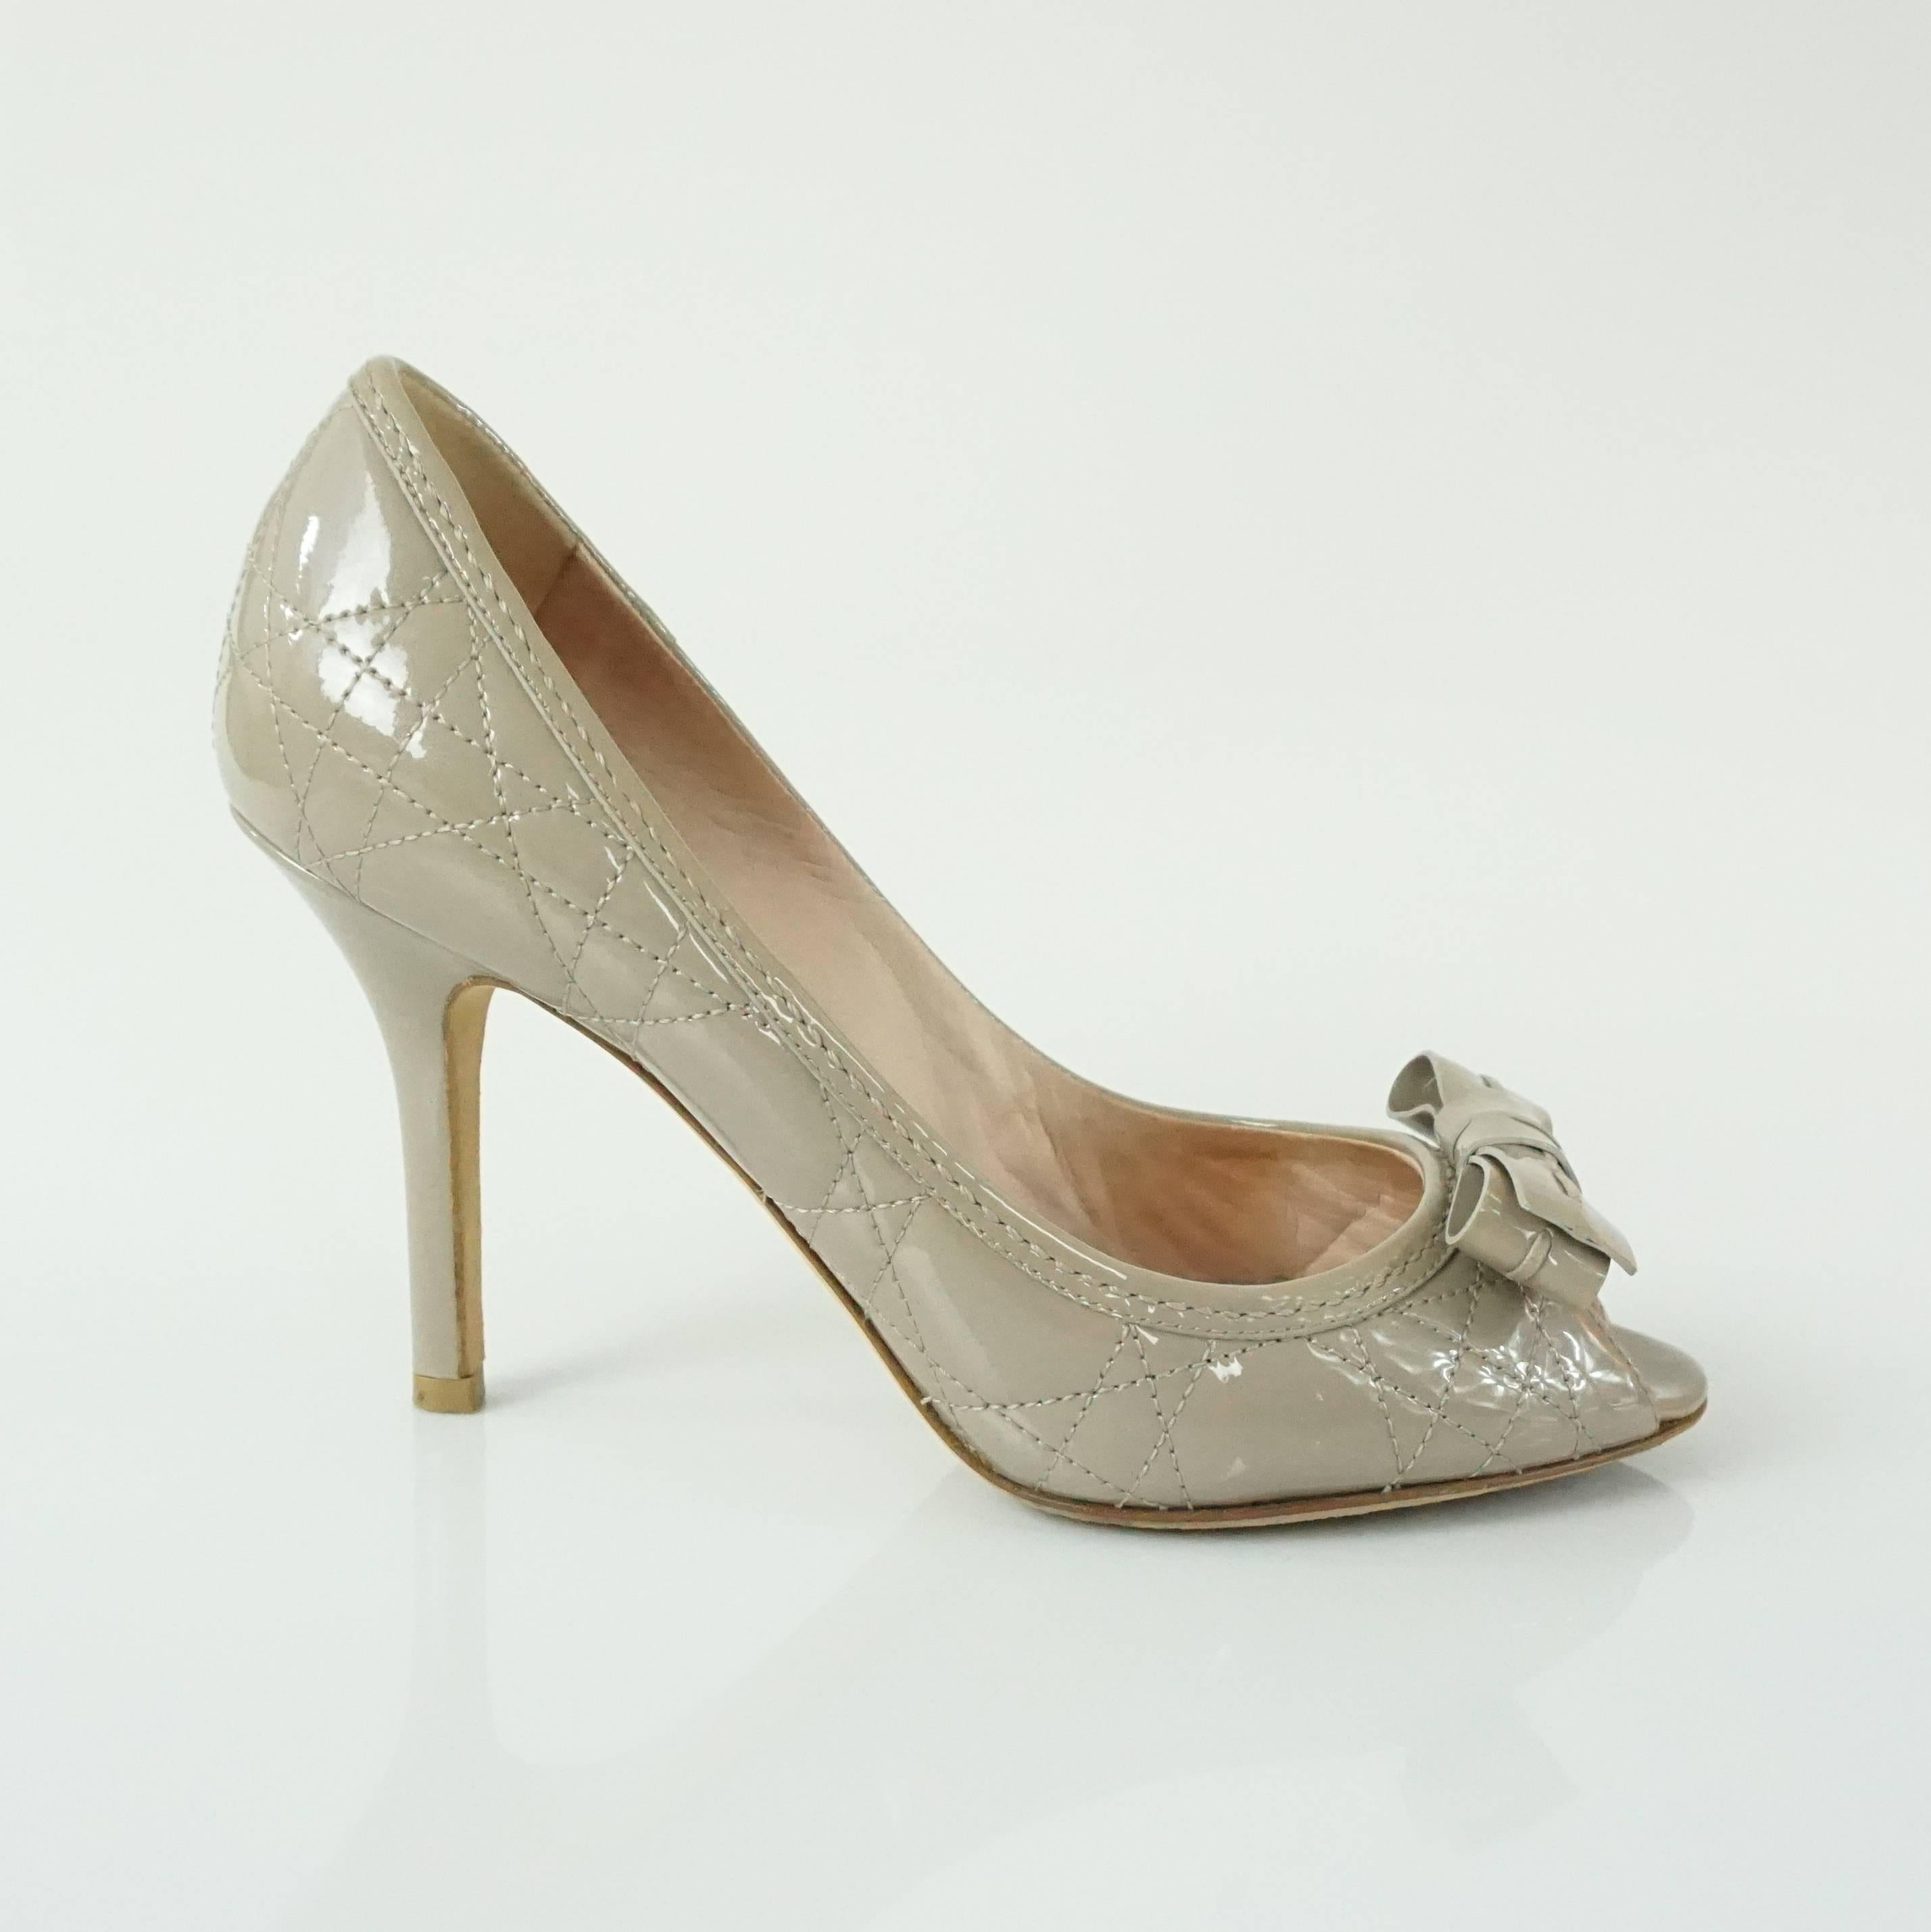 These Christian Dior quilted patent heels have a peep toe. They are taupe and have a bow by the toe. They come with a duster and are in very good condition with some wear on the bottom and some very minor wear on the leather.

Measurement
Heel: